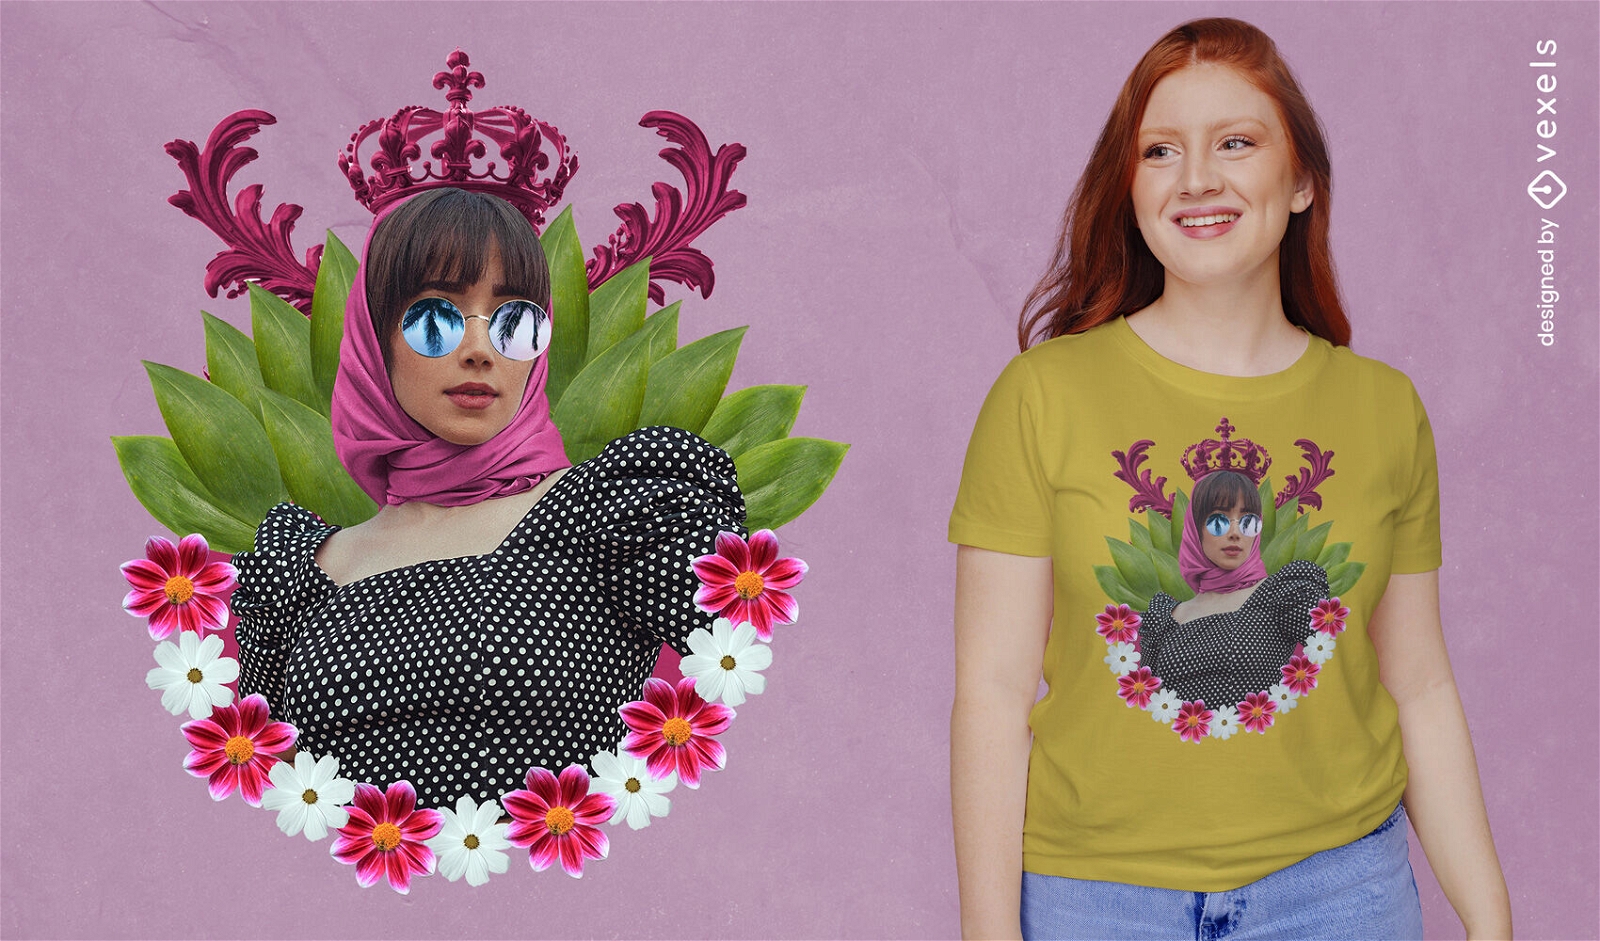 Queen with sunglasses and flowers t-shirt psd